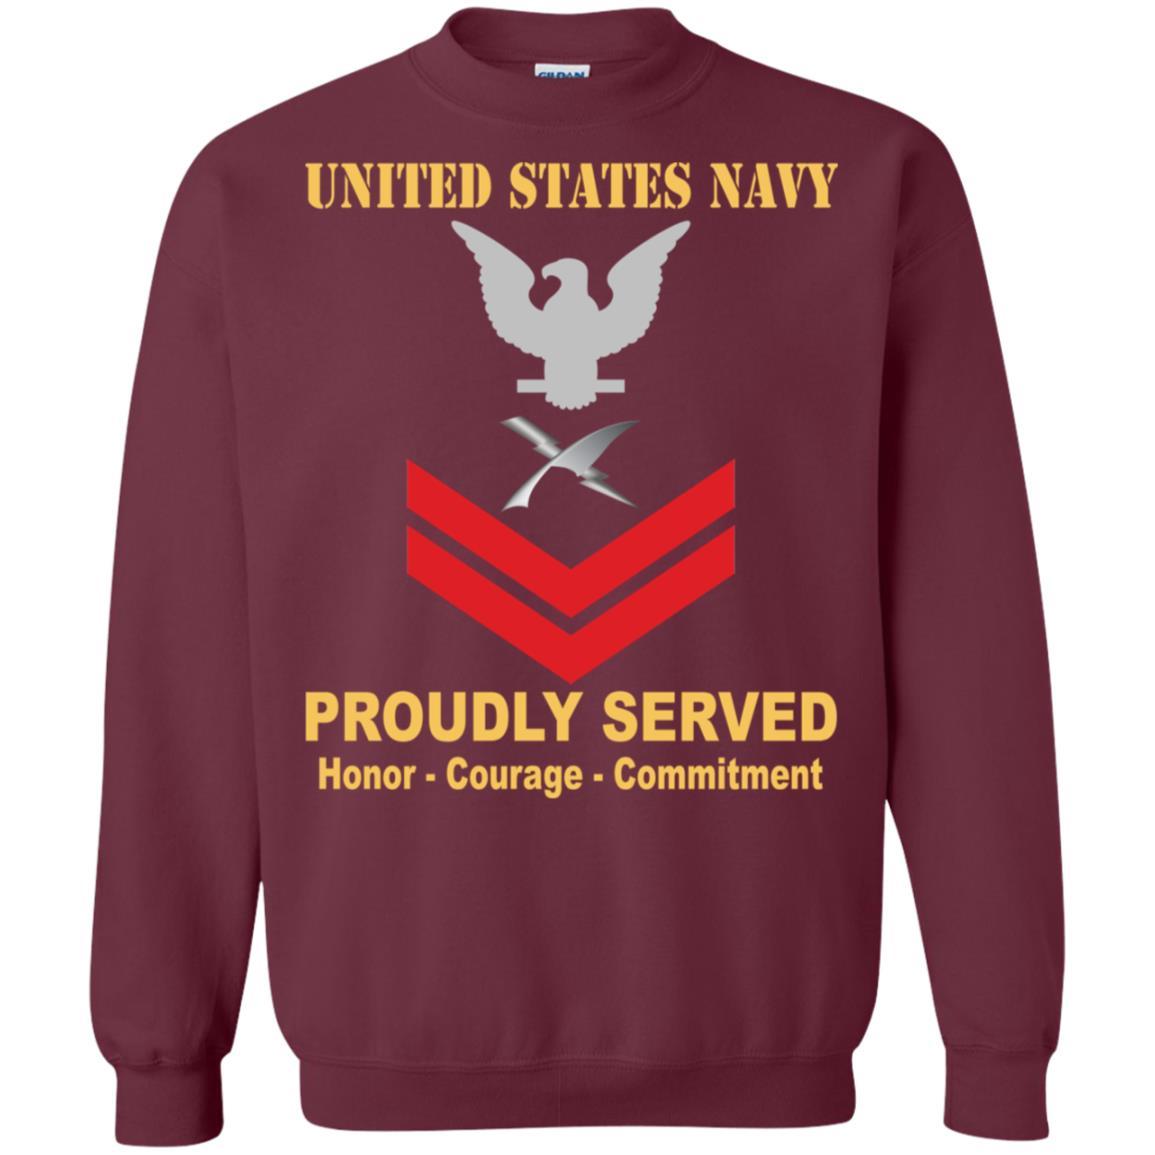 U.S Navy Cryptologic technician Navy CT E-5 Rating Badges Proudly Served T-Shirt For Men On Front-TShirt-Navy-Veterans Nation